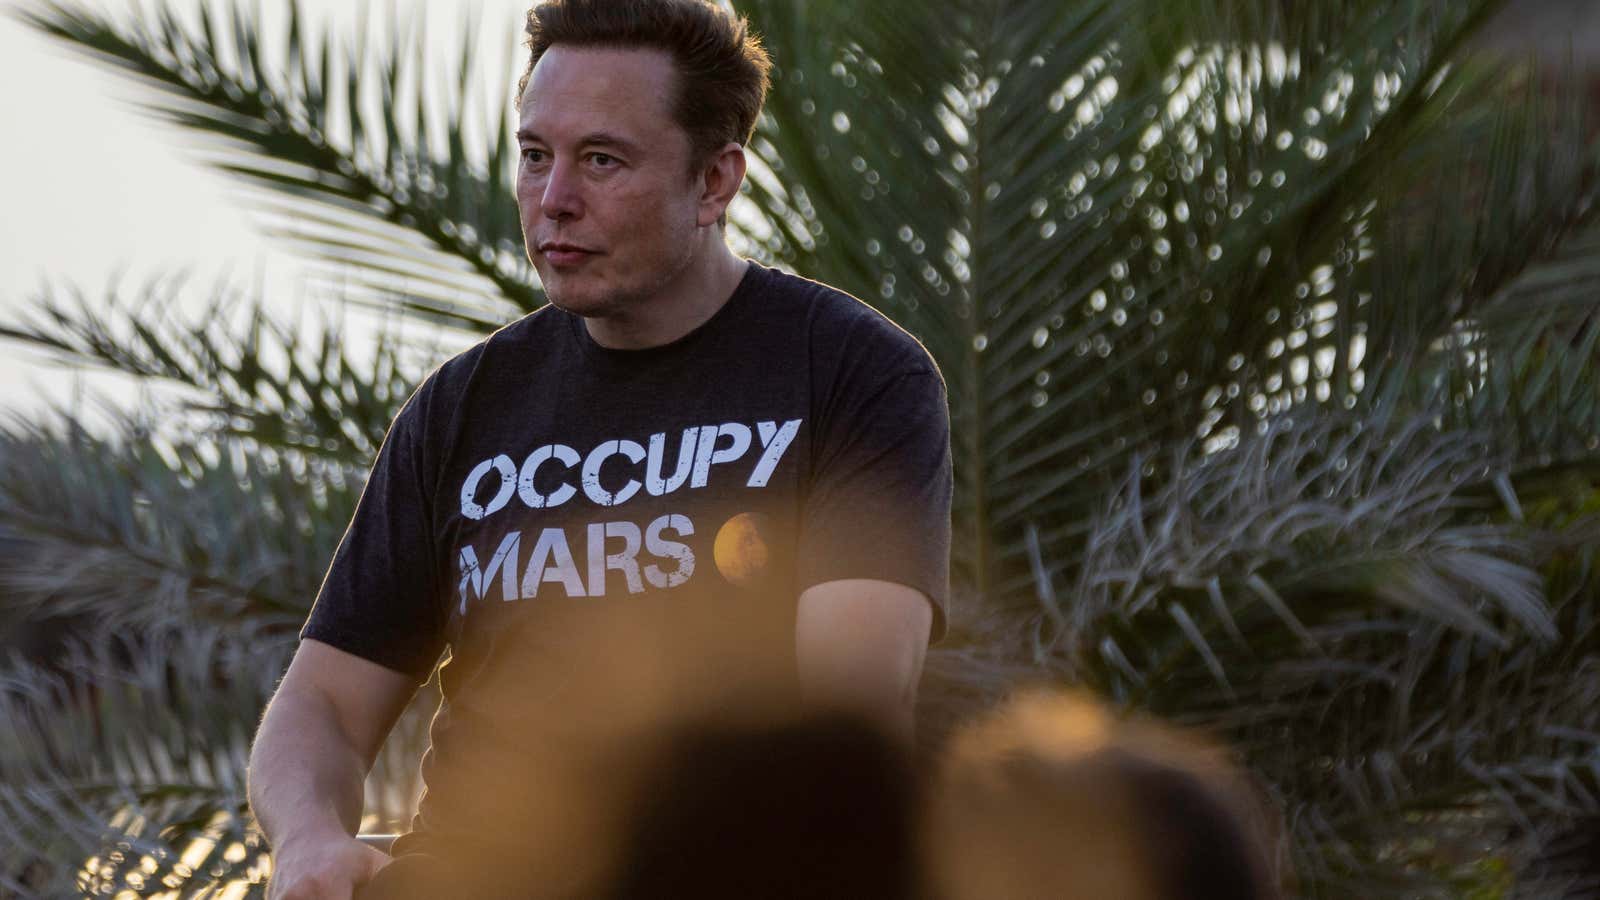 Elon Musk has lost his own popularity contest on Twitter